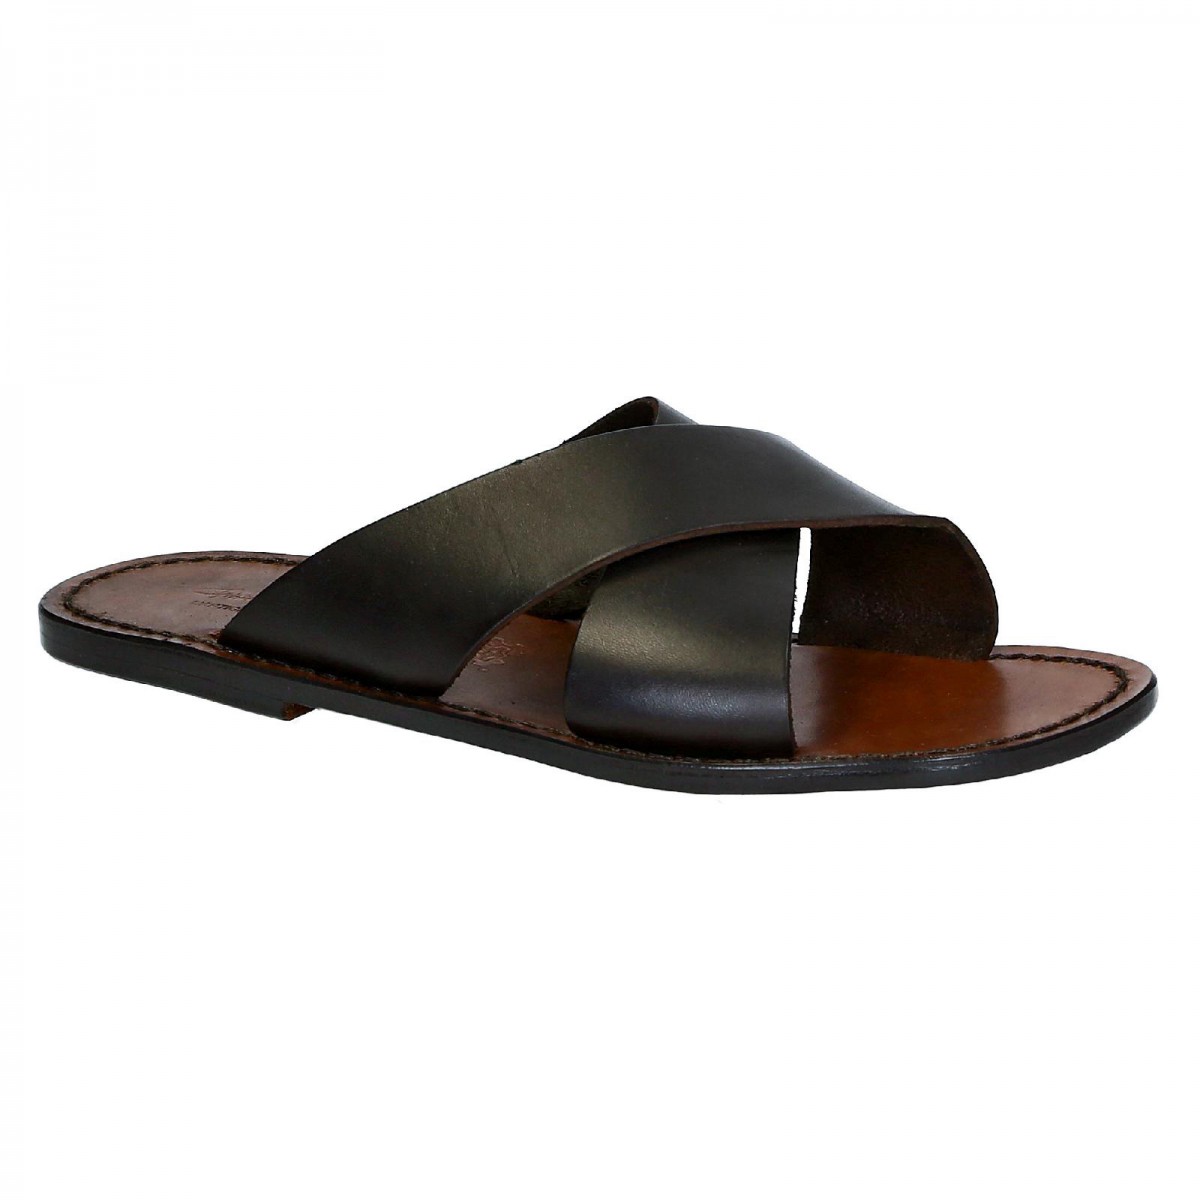 Mens leather slippers handmade in Italy 